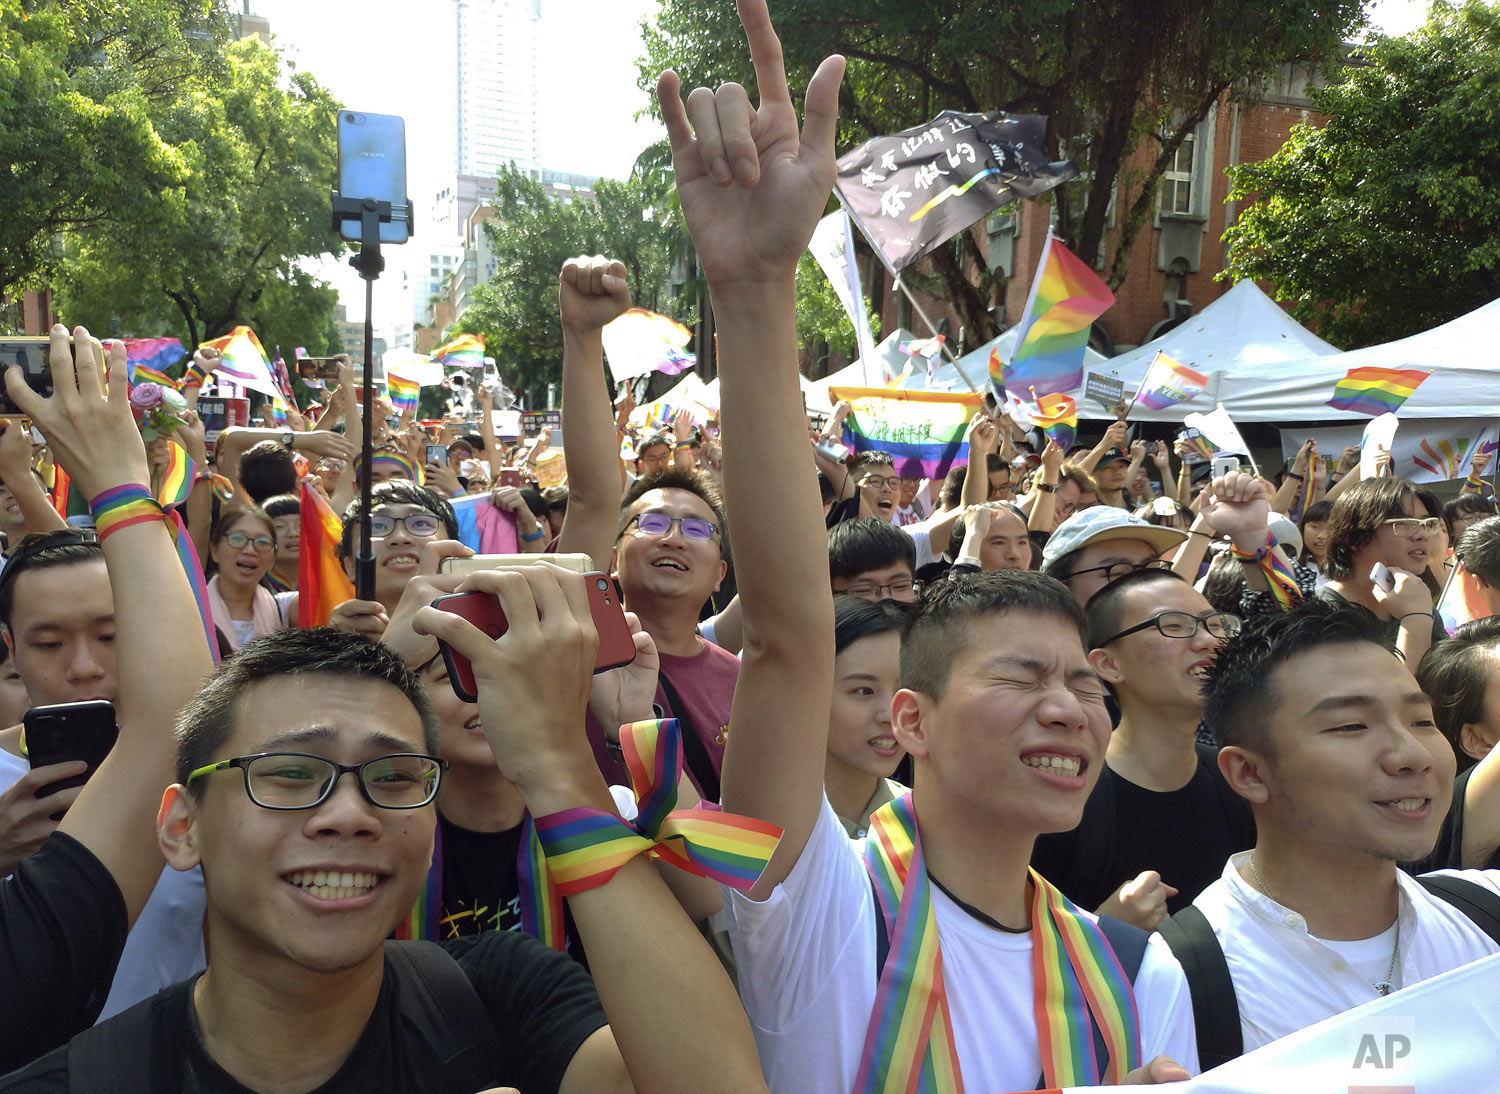  People cheer outside the Legislative Yuan in Taipei, Taiwan on Friday, May 17, 2019 after the passage of a law allowing same-sex marriage - a first for Asia. The vote Friday allows same-sex couples full legal marriage rights, including in areas such